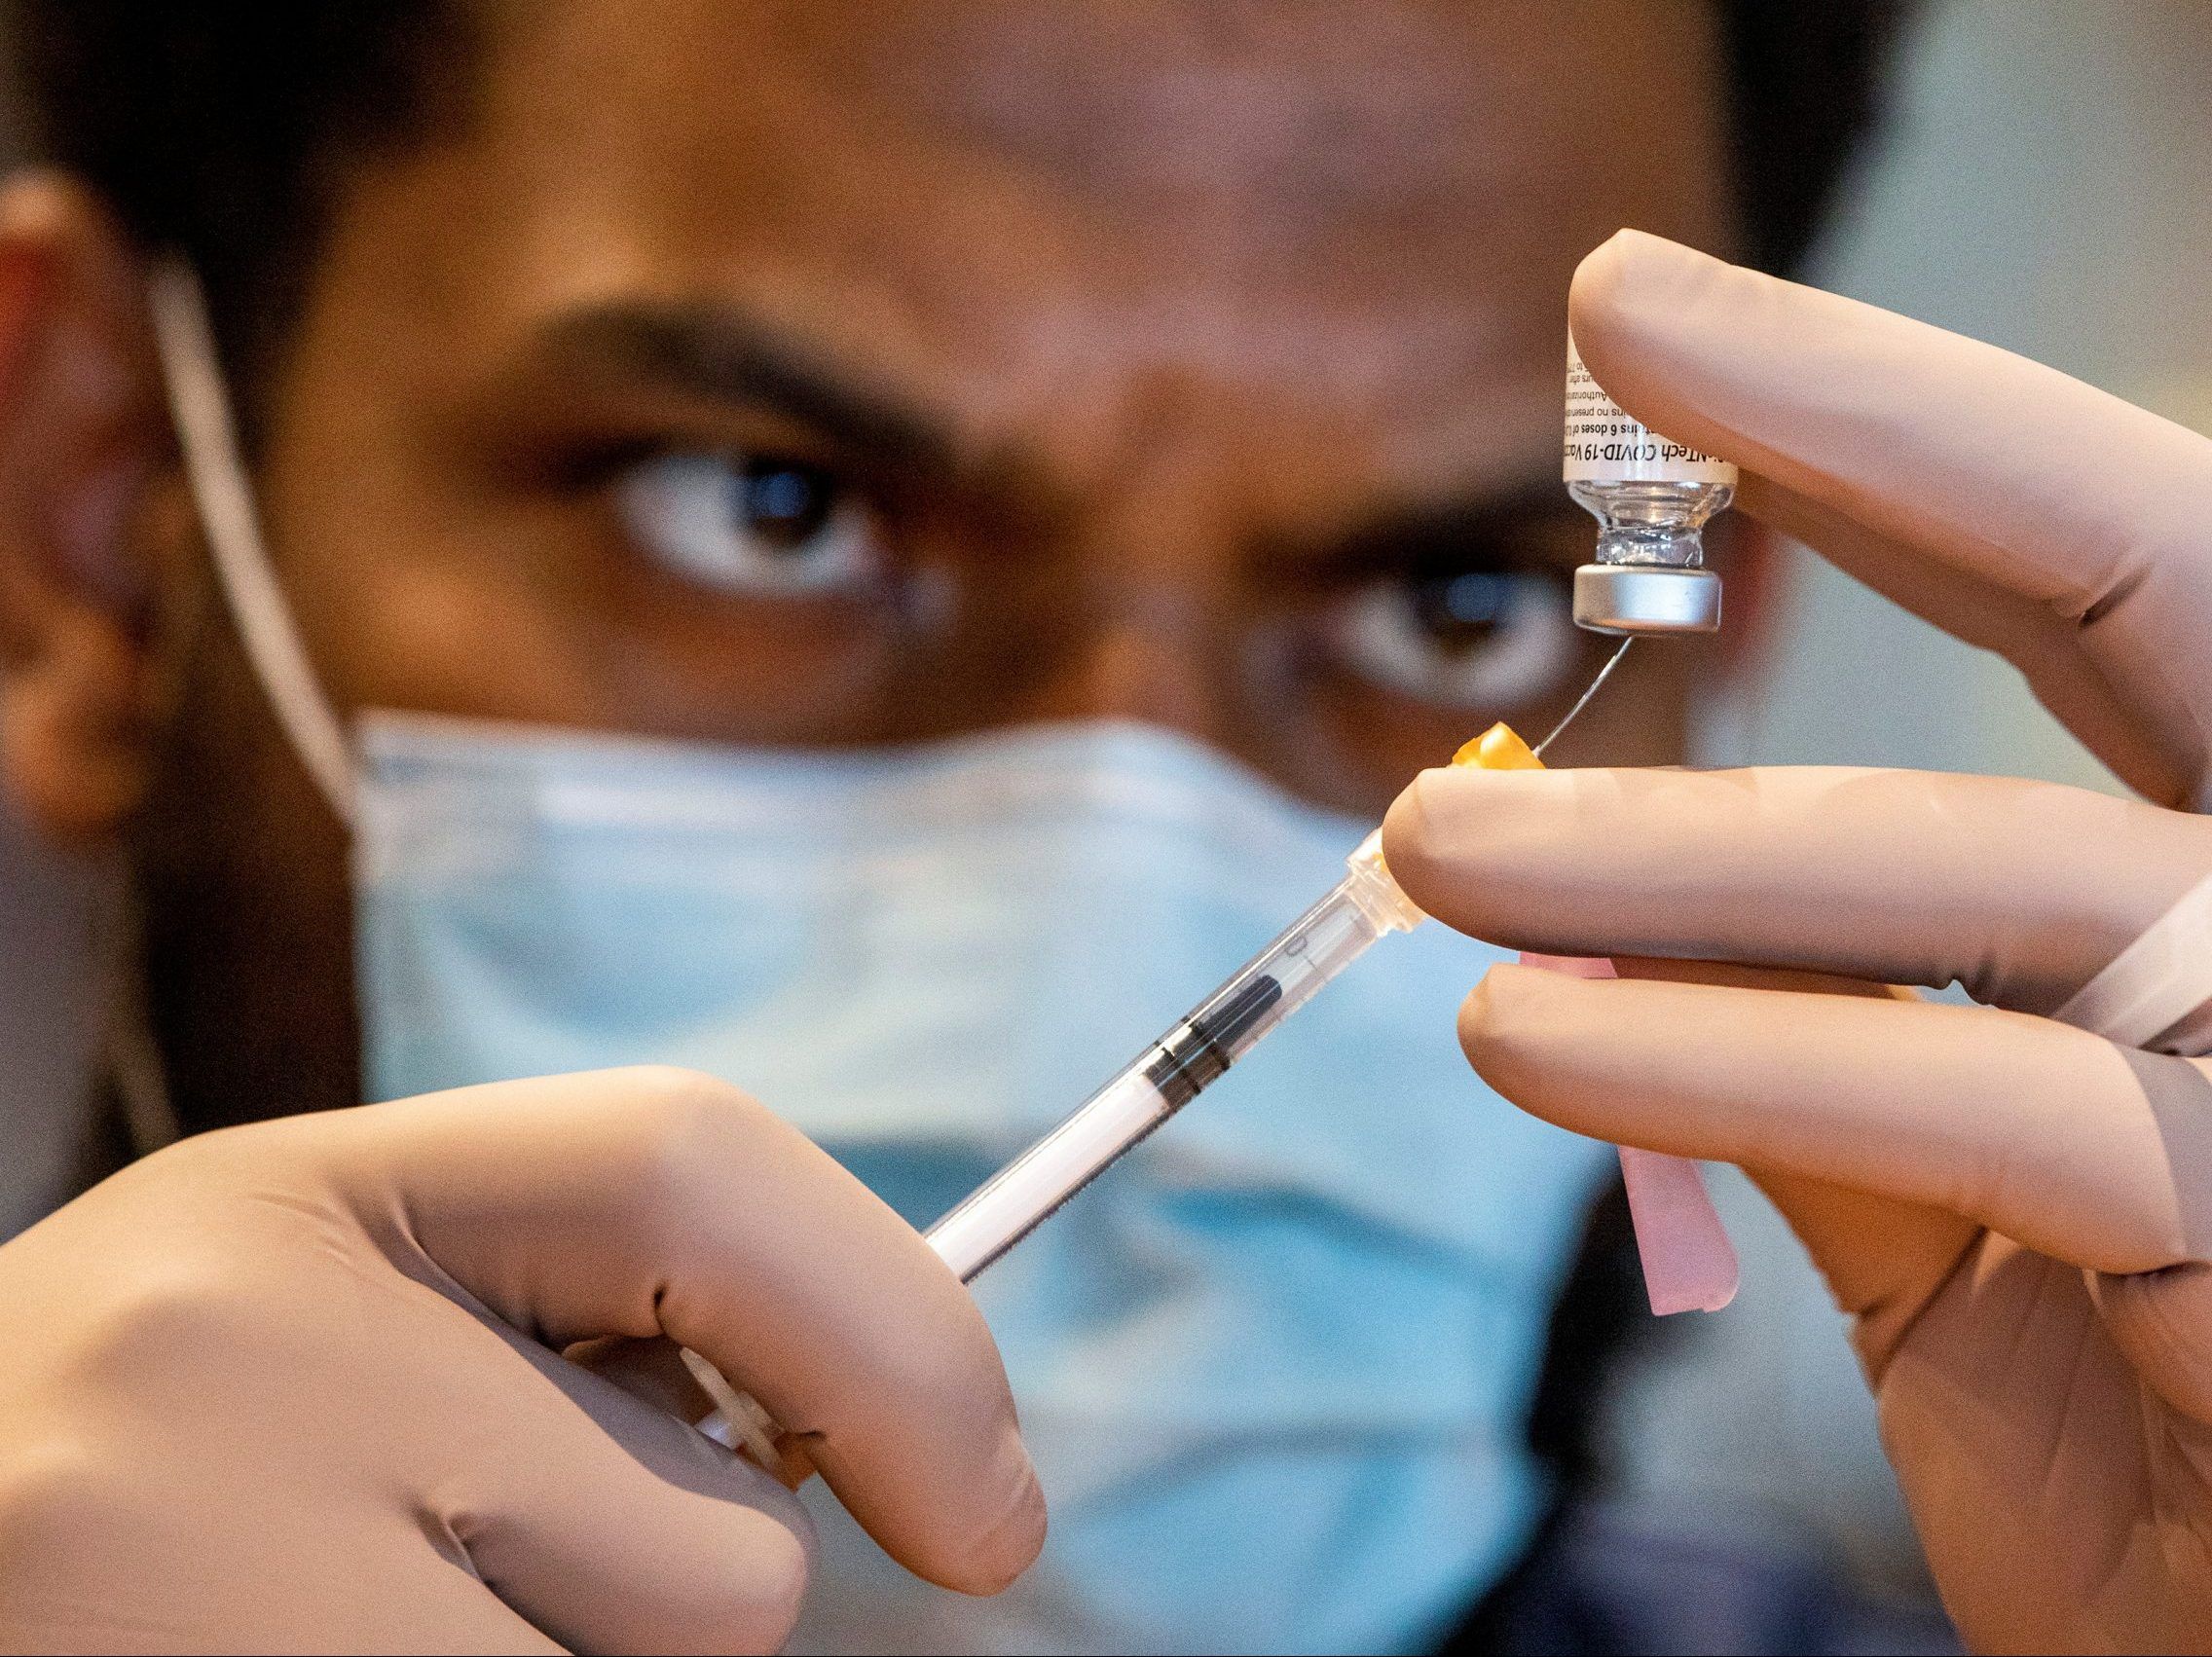 A health-care worker prepares a dose of the Pfizer/BioNTech COVID-19 vaccine at Woodbine Racetrack pop-up vaccine clinic in Toronto, May 5, 2021.